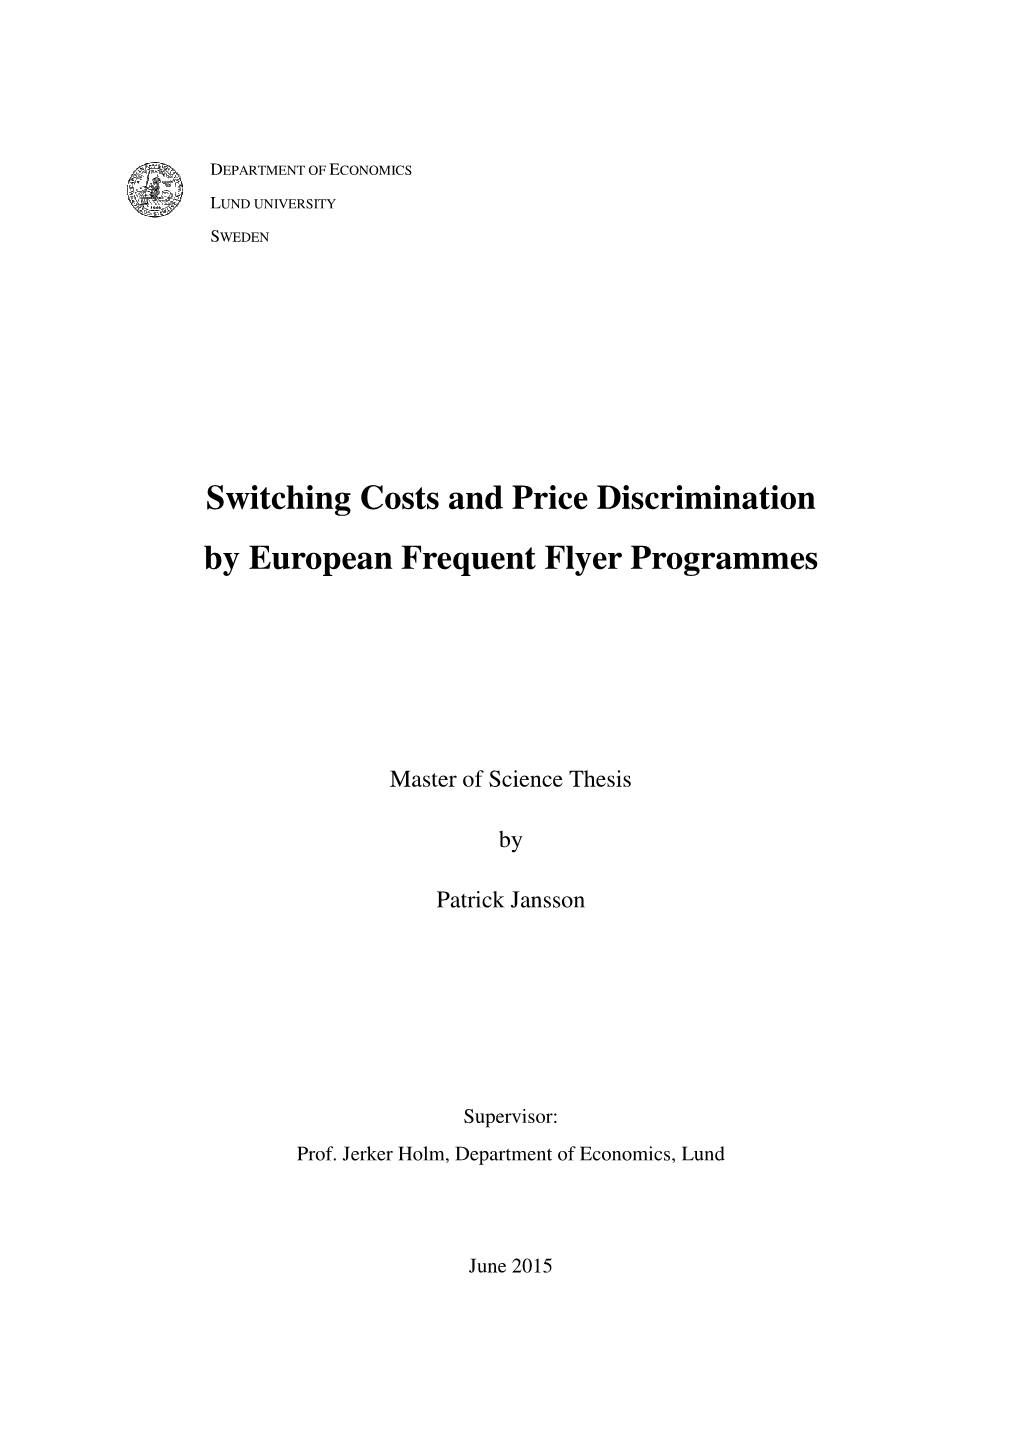 Switching Costs and Price Discrimination European Frequent